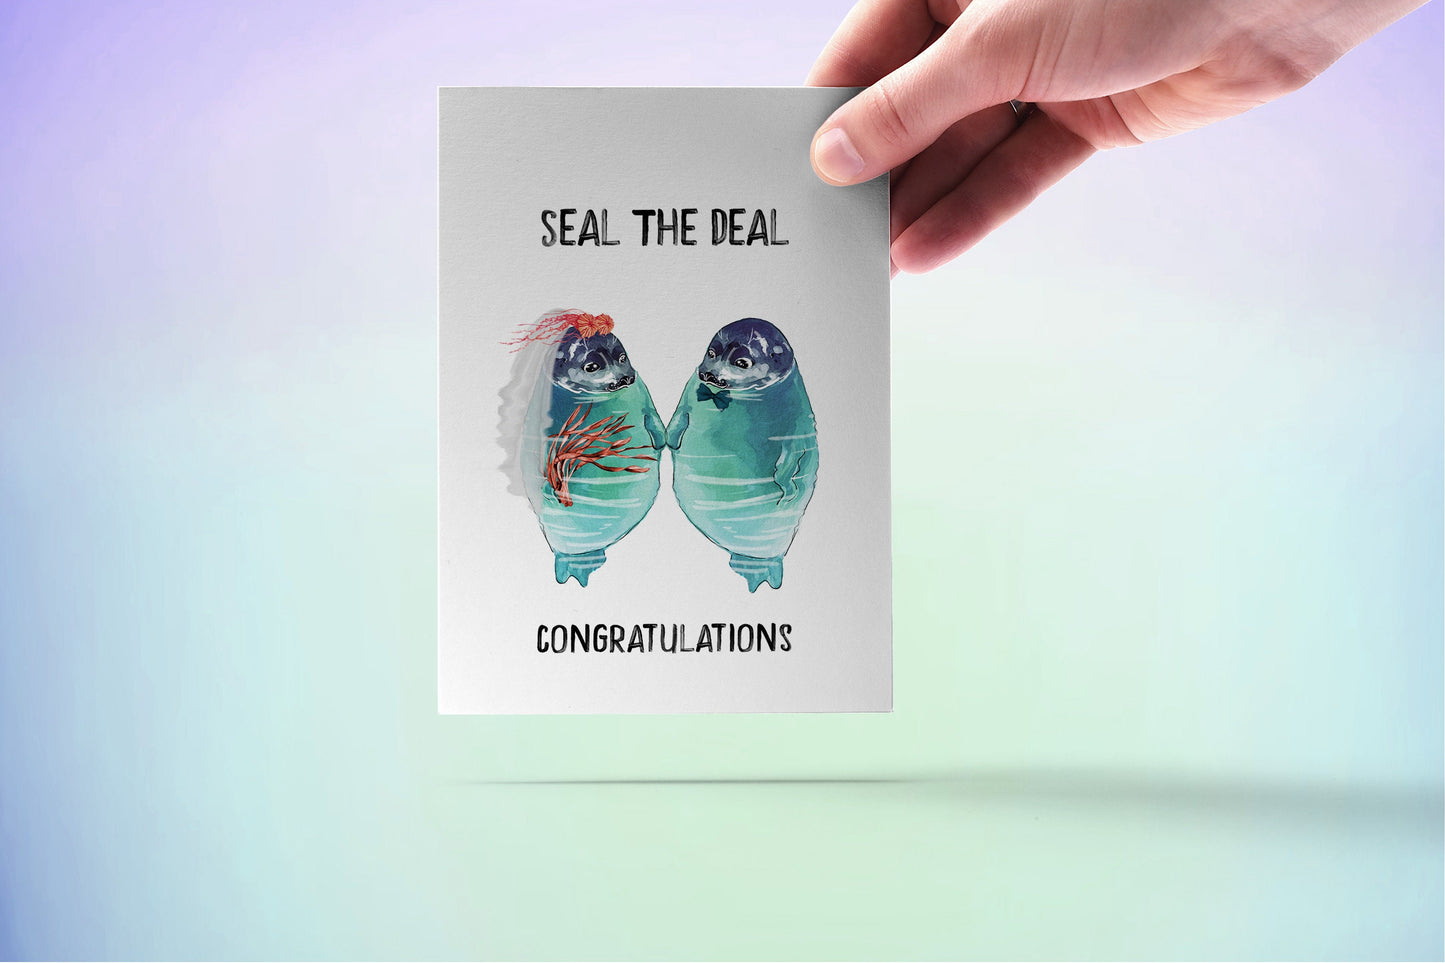 Best Friend Wedding Cards Funny - Seal The Deal Congratulations Card For Bridal Shower